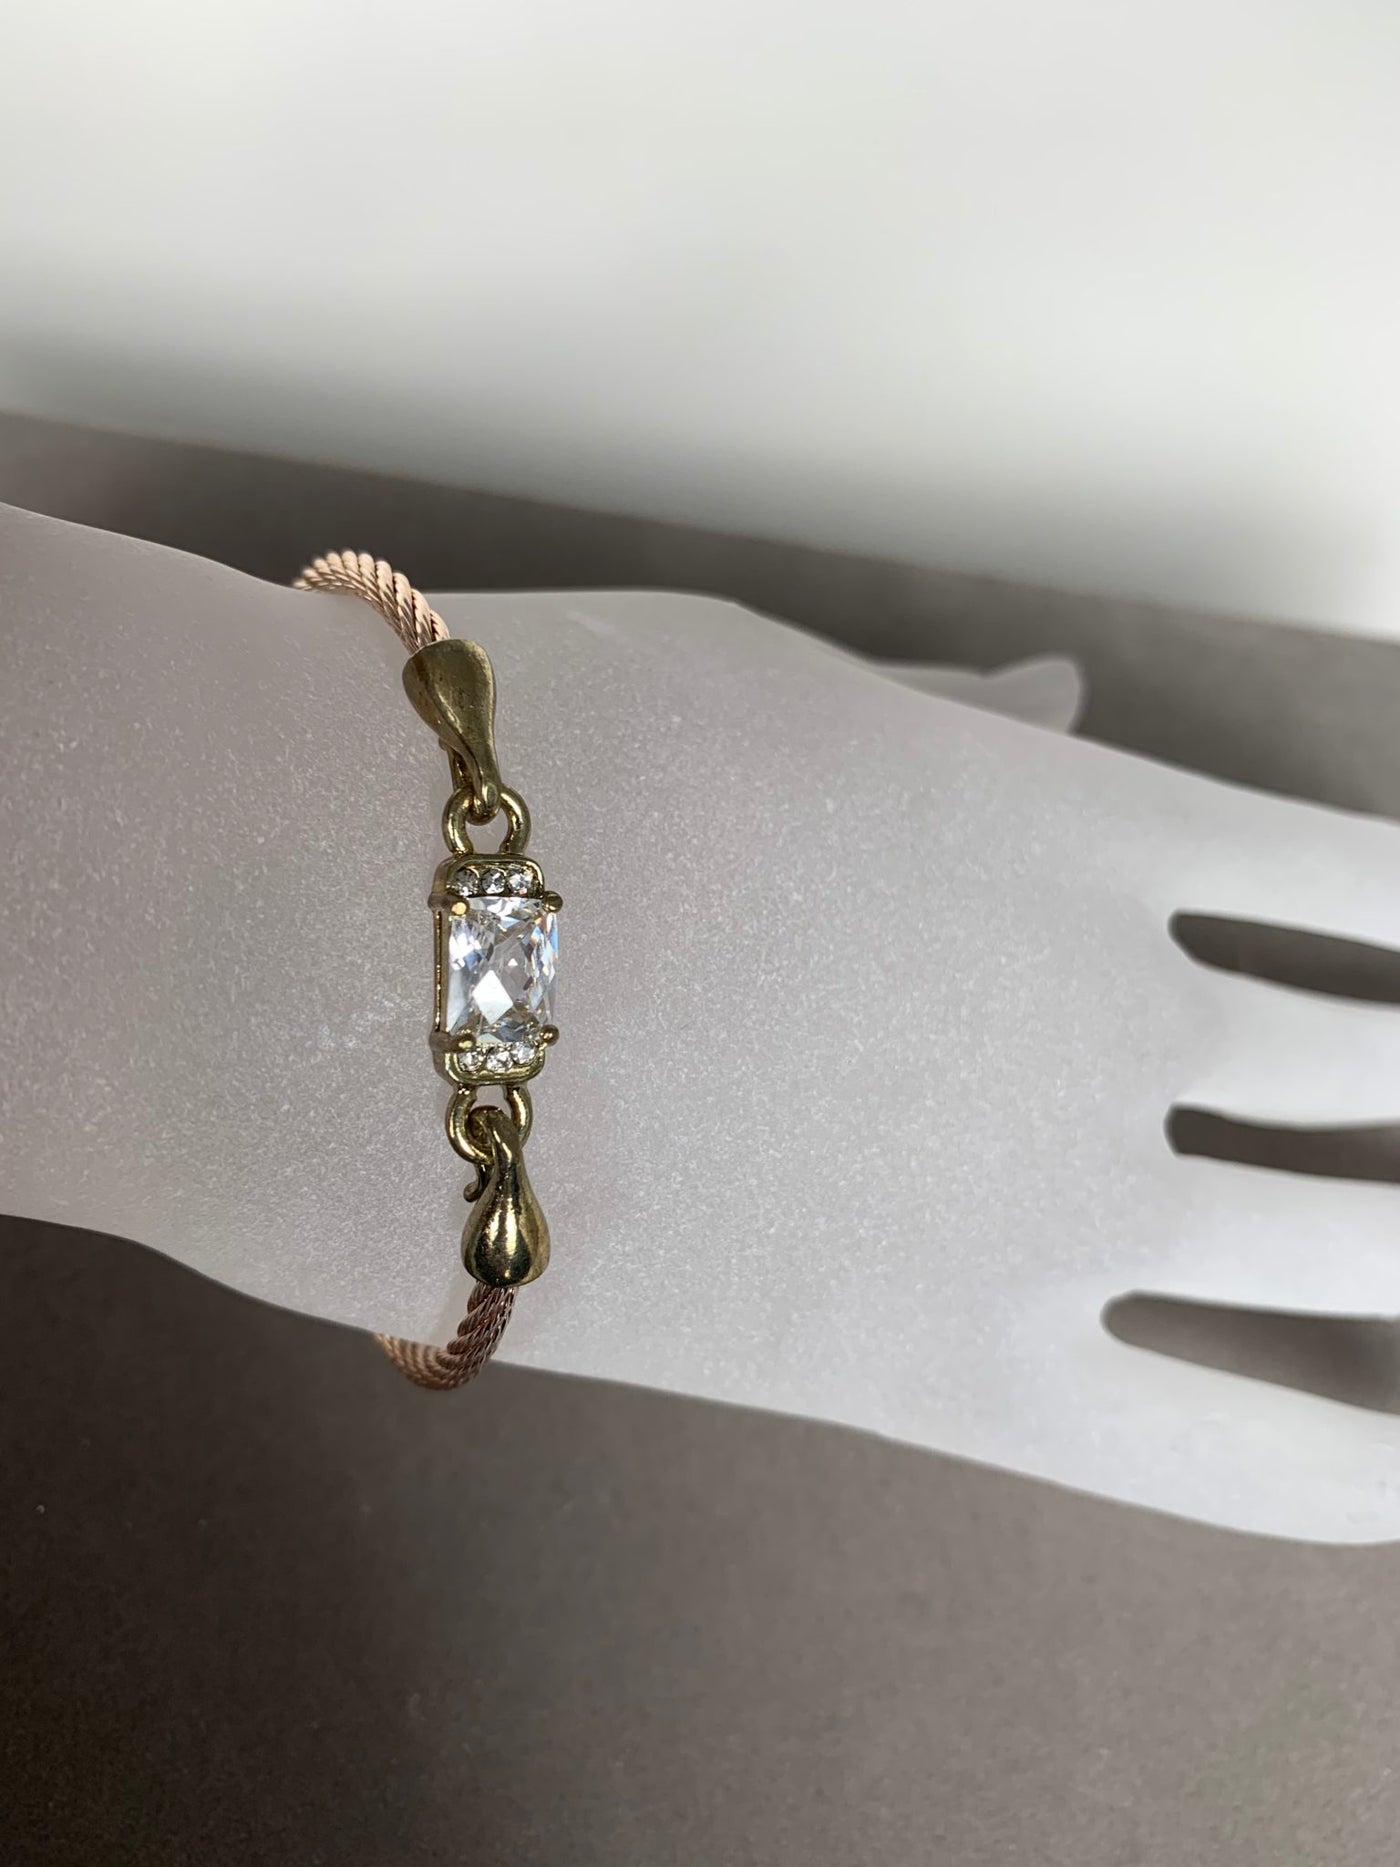 Rose Gold Tone Wire Bangle Bracelet featuring Clear Crystal